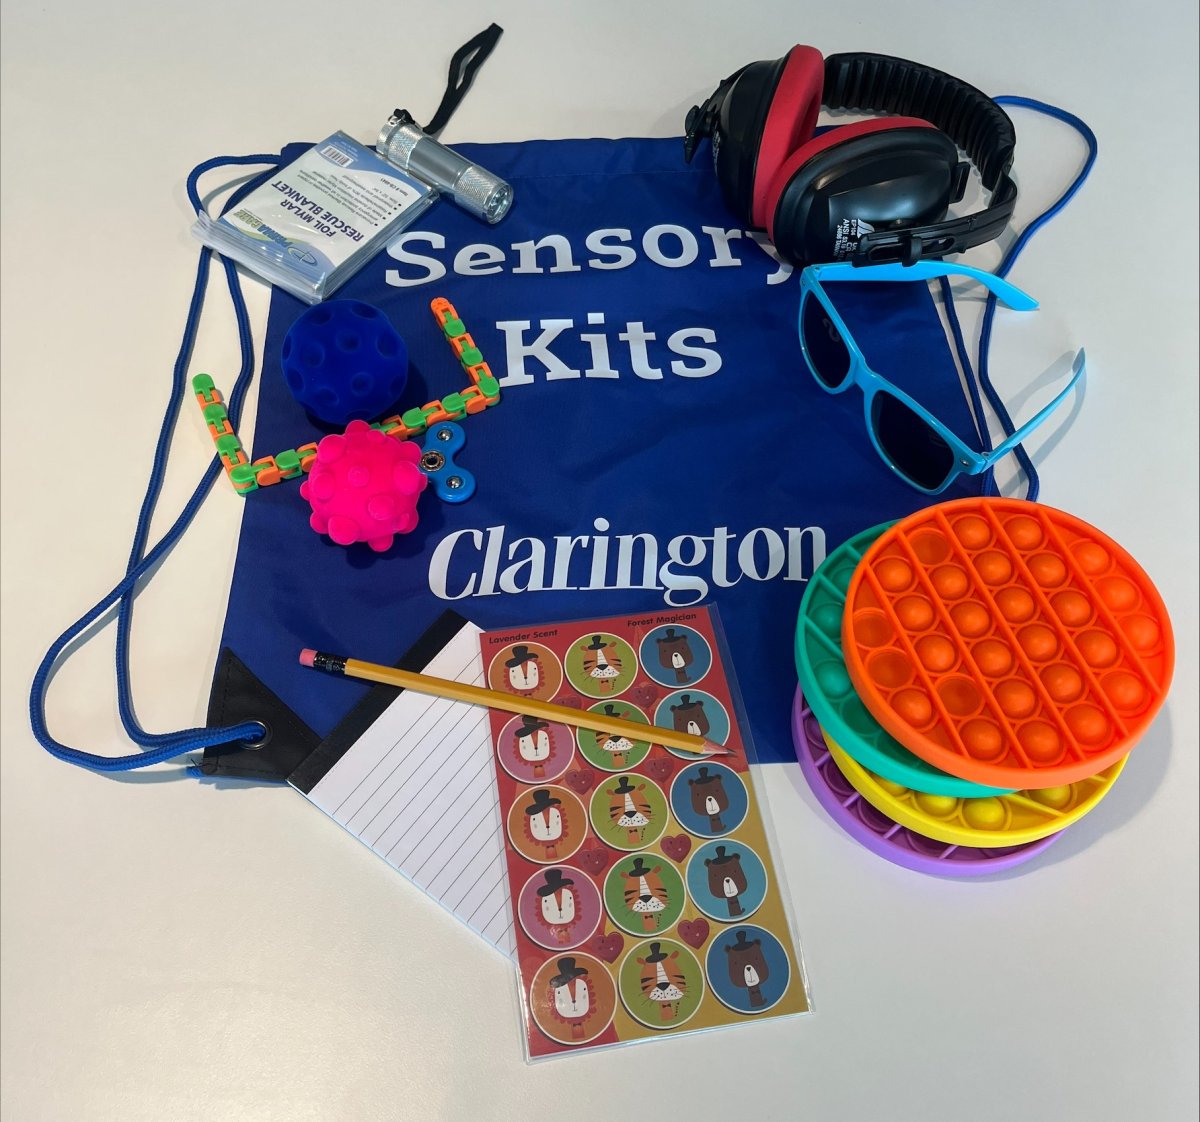 Sensory kits to support autistic community members